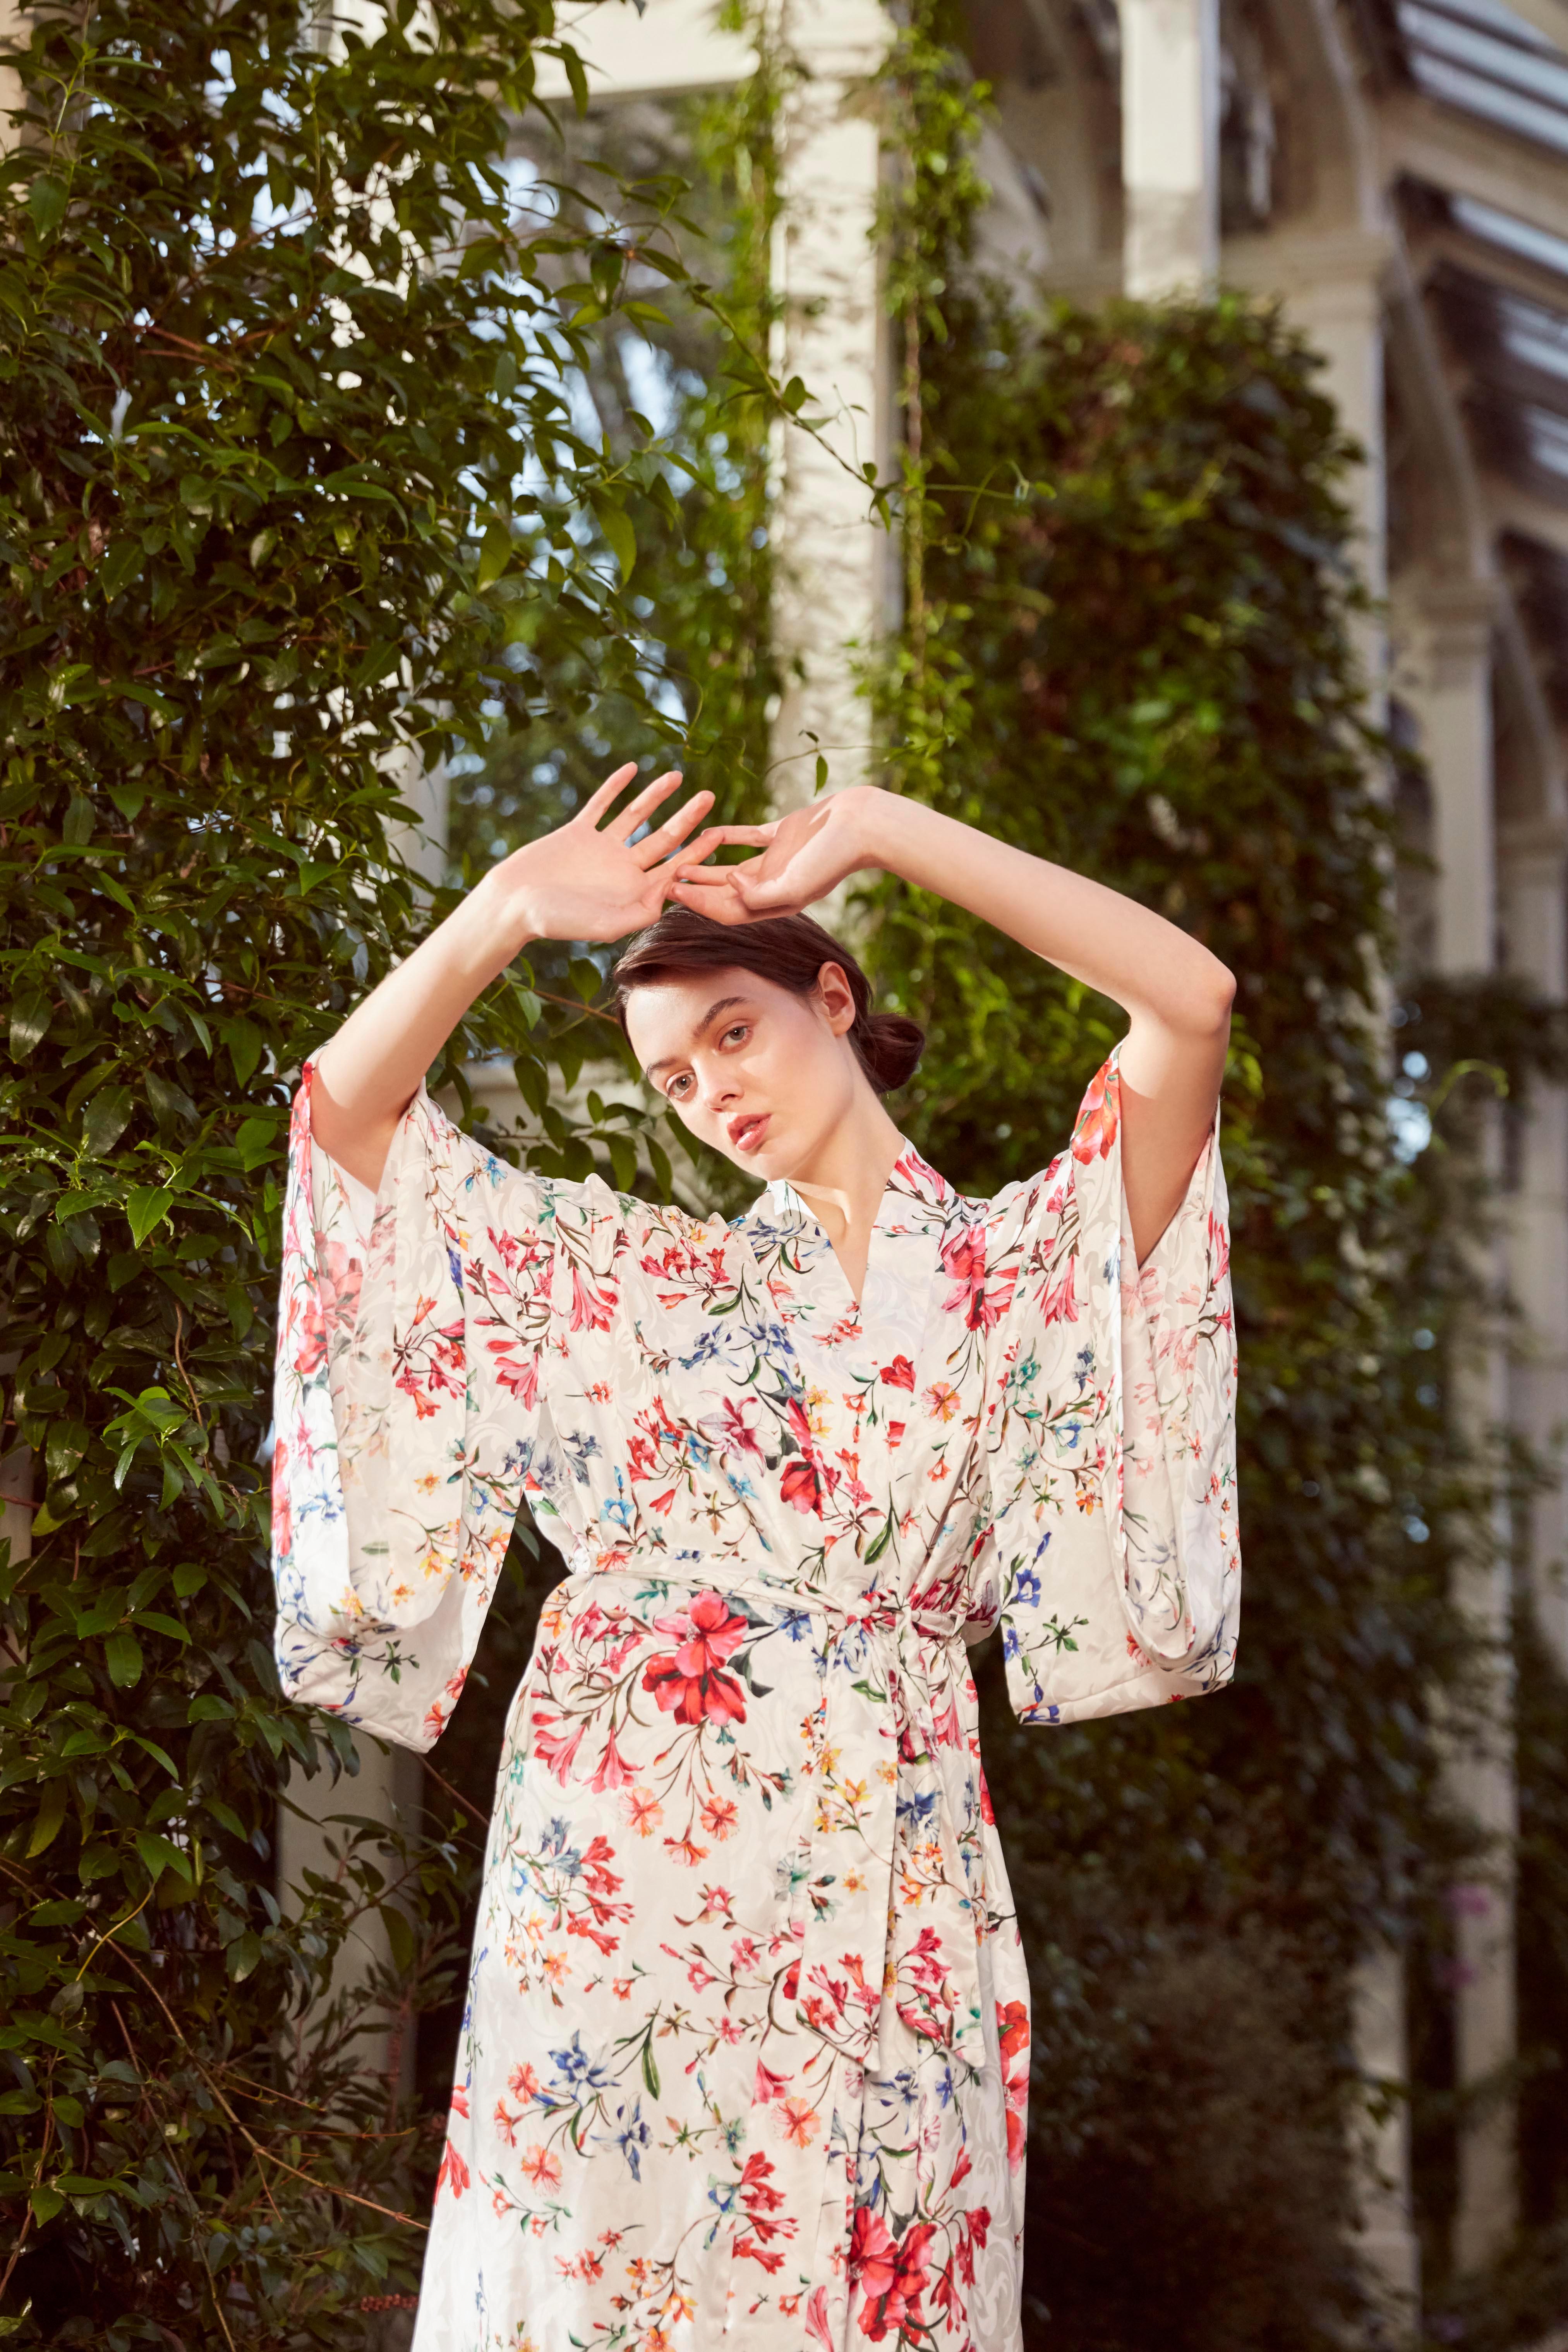 Verheyen London Flower Kimono dress in Italian Silk Satin - One Size 

The Verheyen London Kimono is the perfect dress for evening wear or coat dress to wear with a pair of jeans and heels in the evening.  
Handmade in London, made with 100% Italian